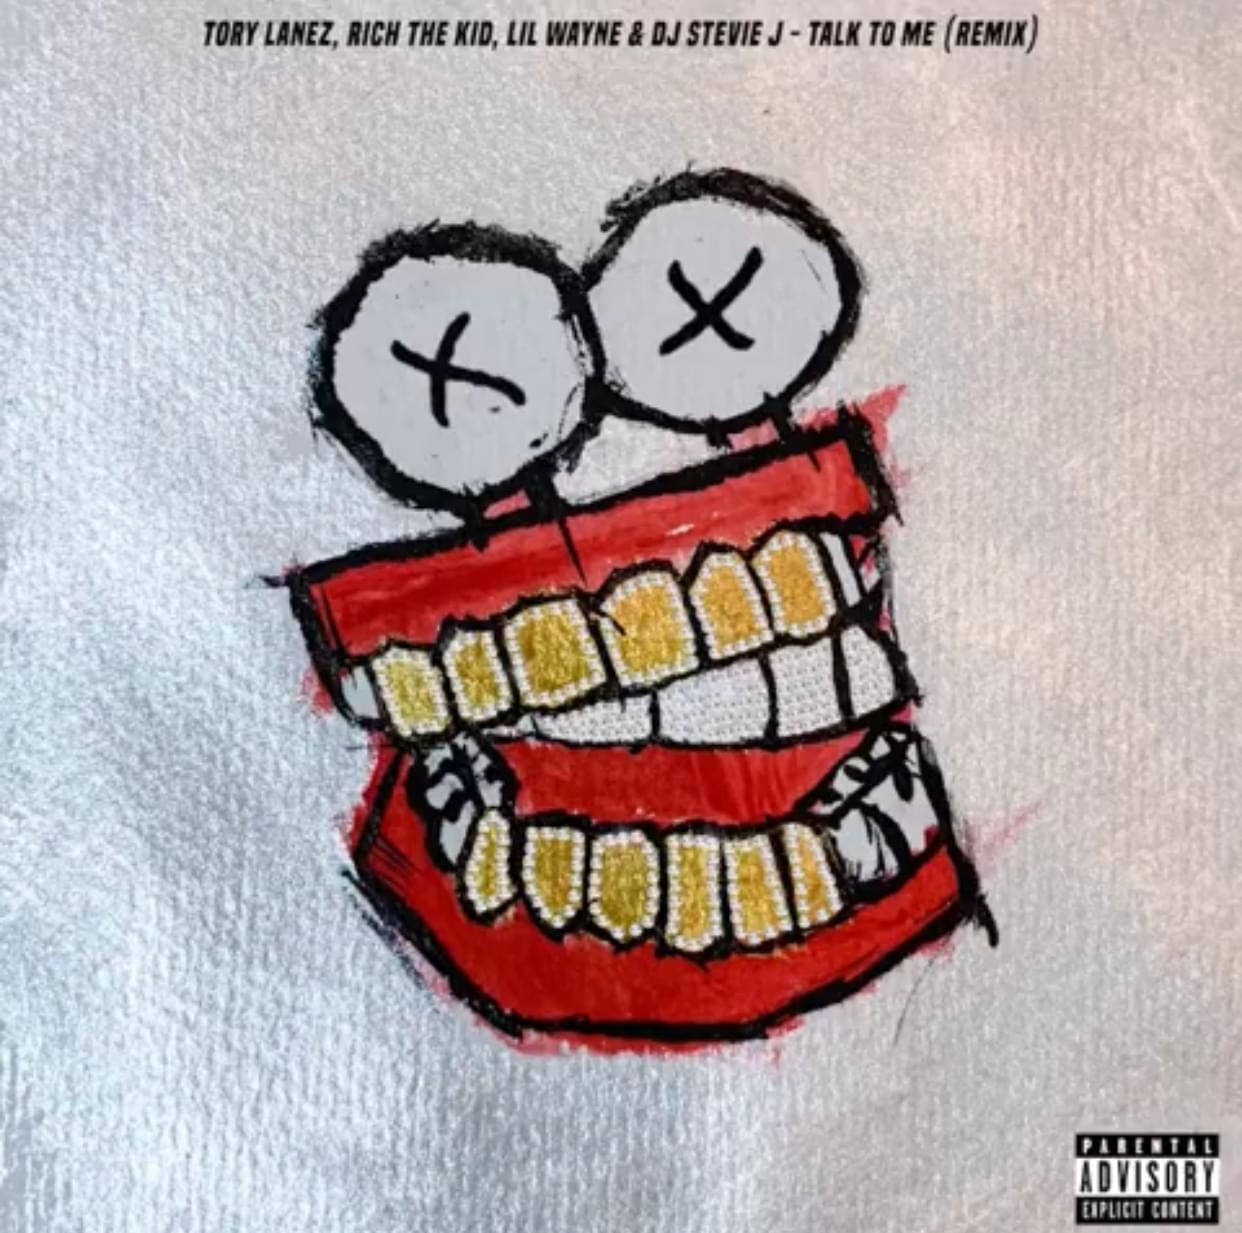 Tory Lanez Releases TAlk tO Me Remix Feat. Lil Wayne & Rich The Kid [LISTEN]